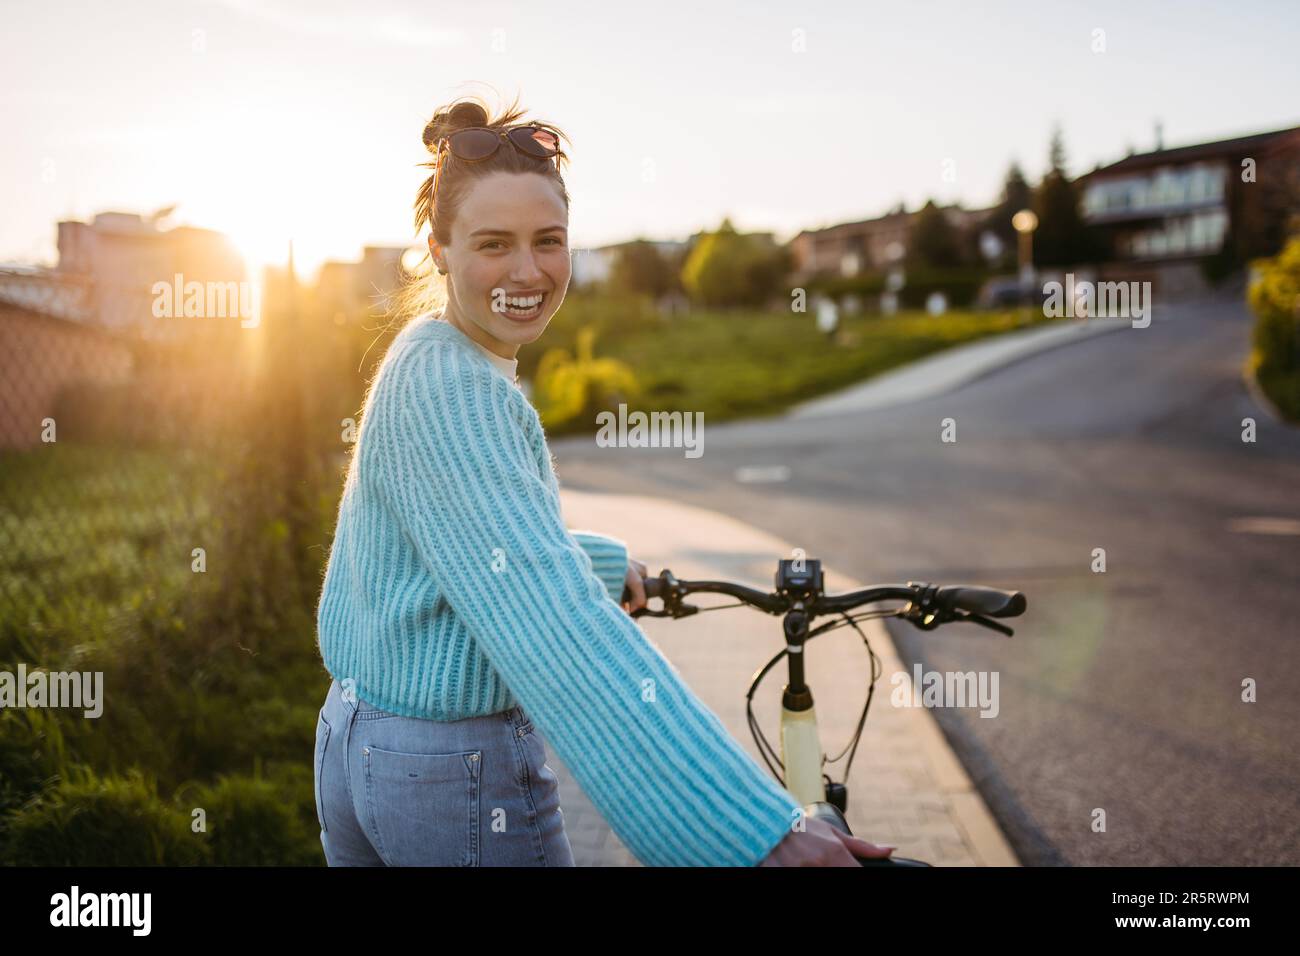 Young woman on electro bicycle, concept of commuting and ecologic traveling. Stock Photo